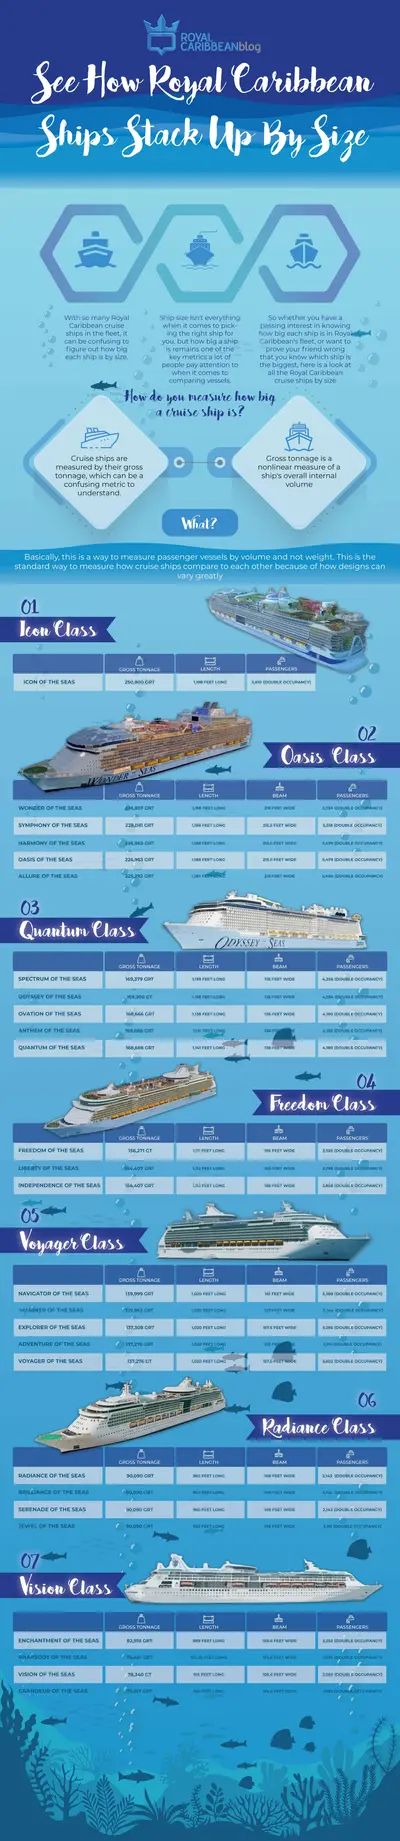 Royal Caribbean cruise ships by size